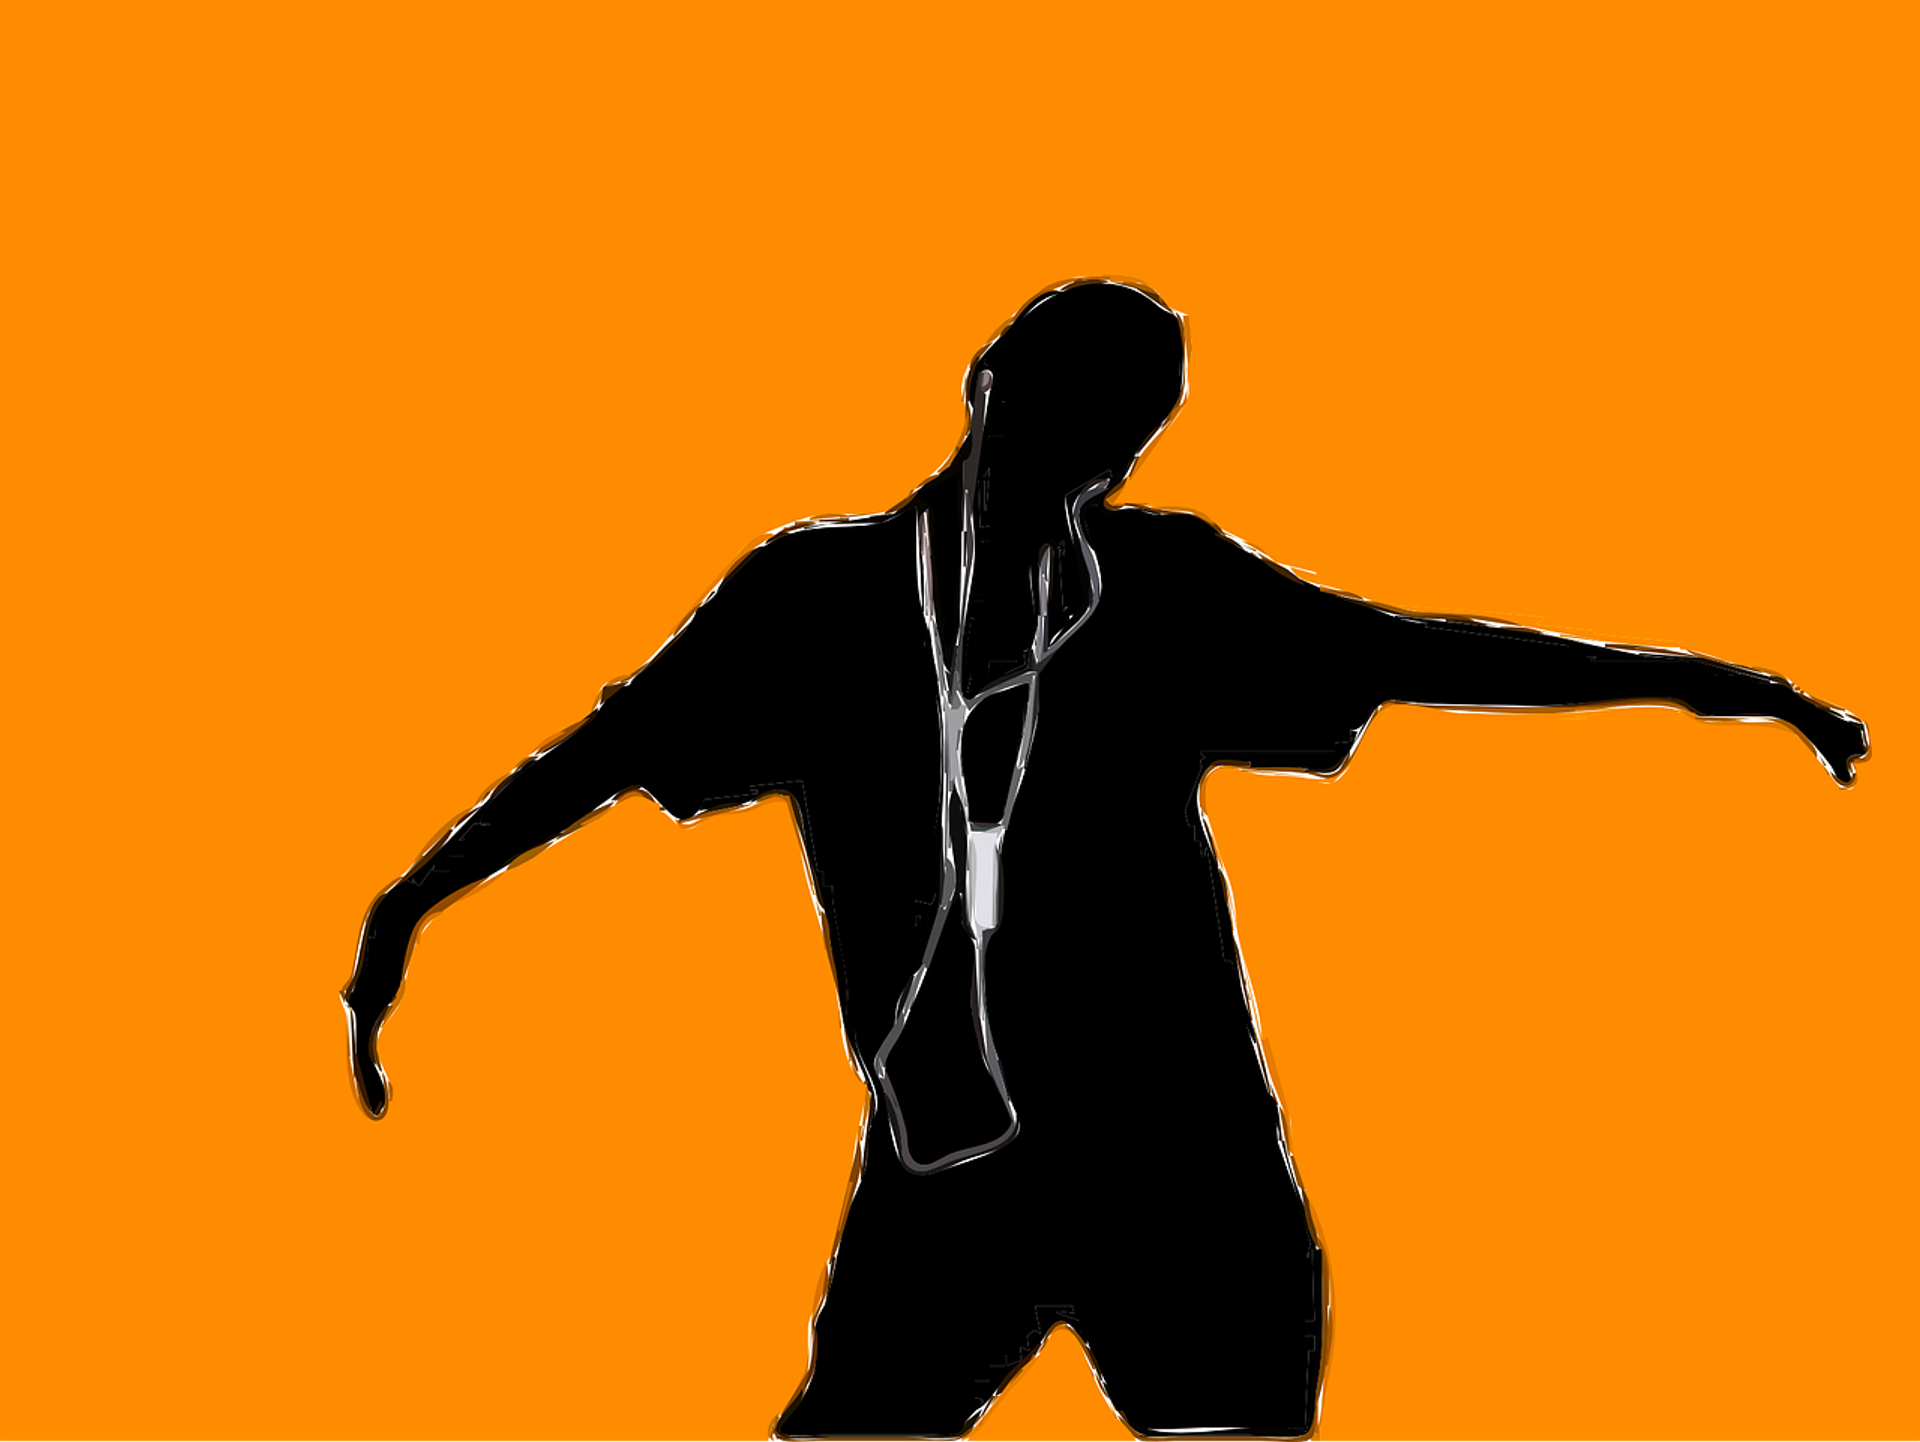 A person stands with arms outstretched, enjoying music through white headphones connected to an Apple iPod. The figure appears as a black silhouette against a vibrant orange backdrop.